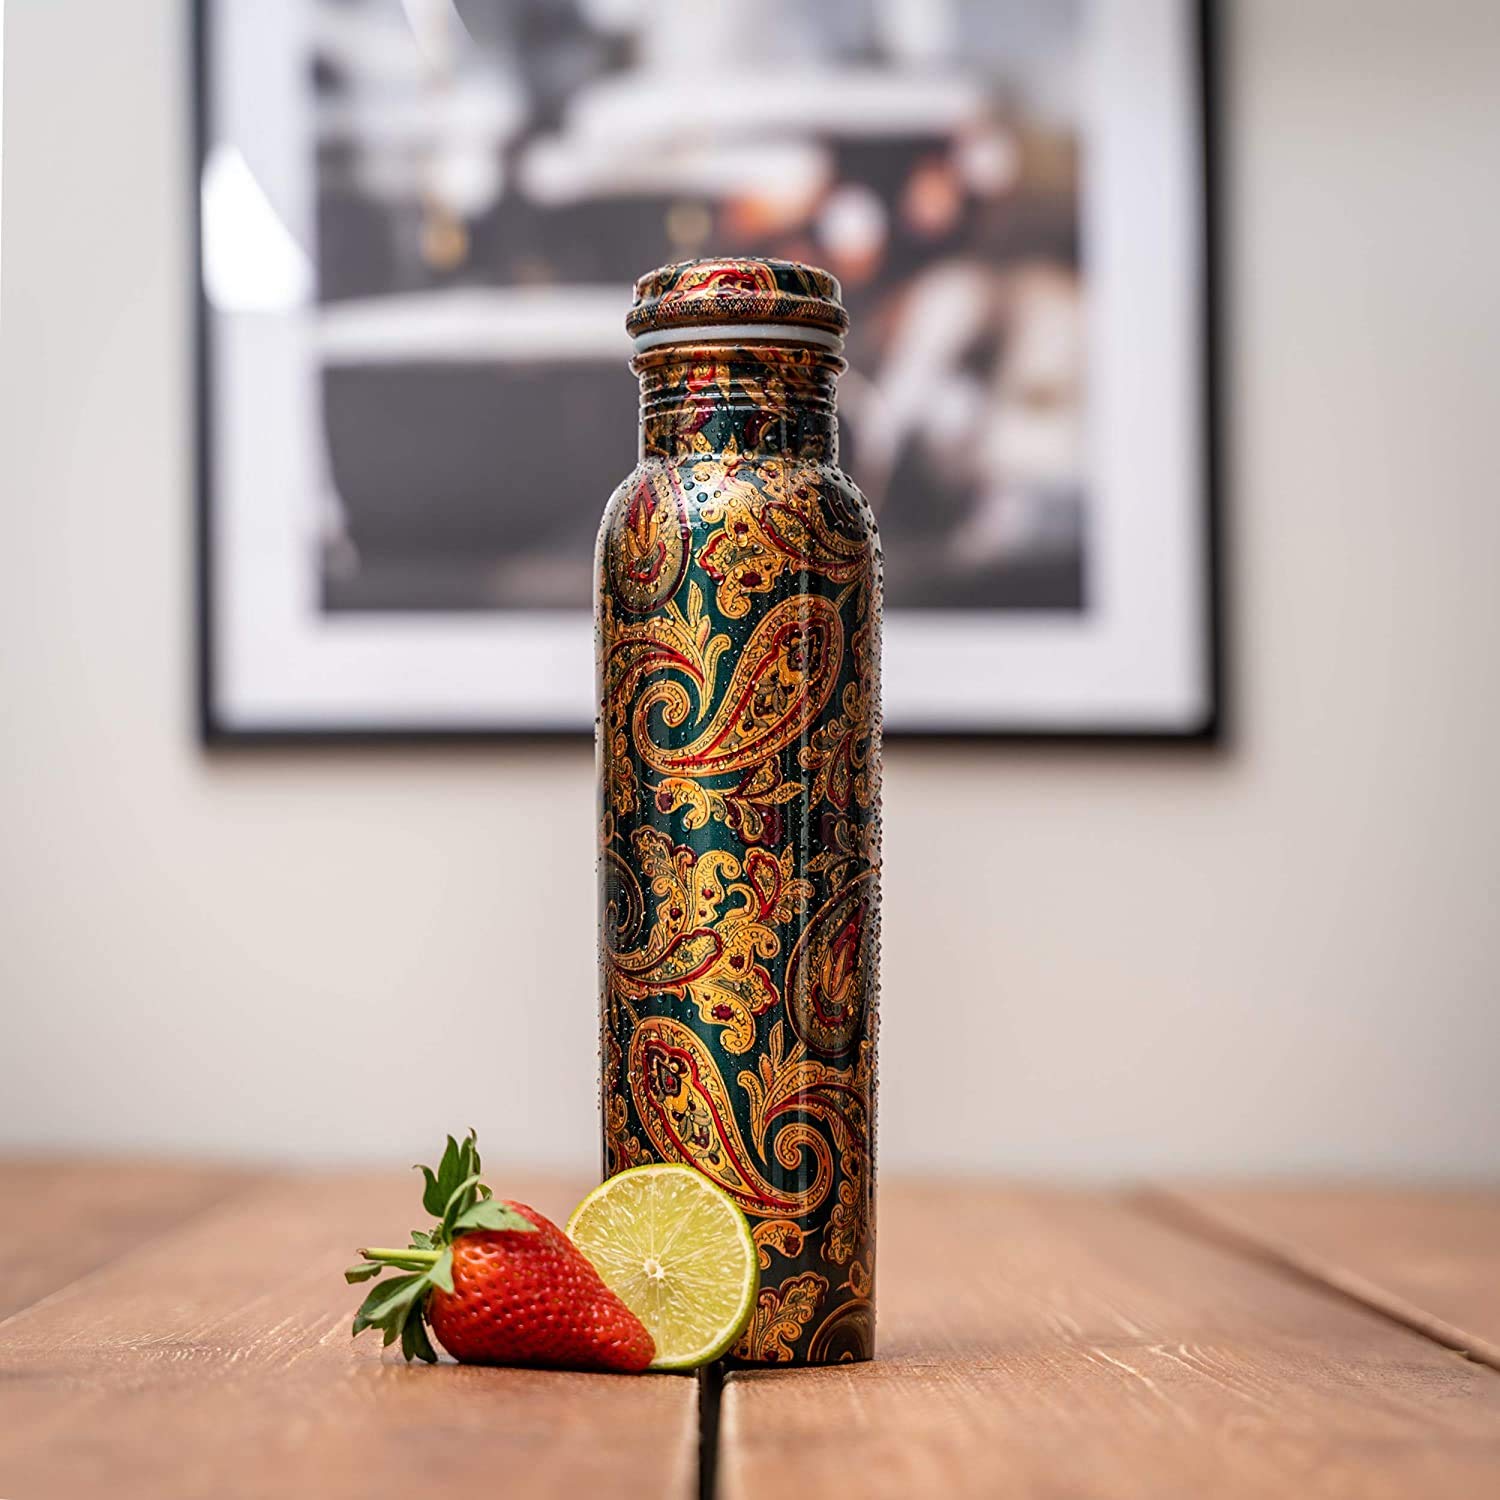 VEDANA Premium Ayurvedic Pure Copper Water Bottle | Leak Proof 1 Liter Copper Vessel for Drinking Water | Great Water Bottle for Sports, Yoga & Everyday Use